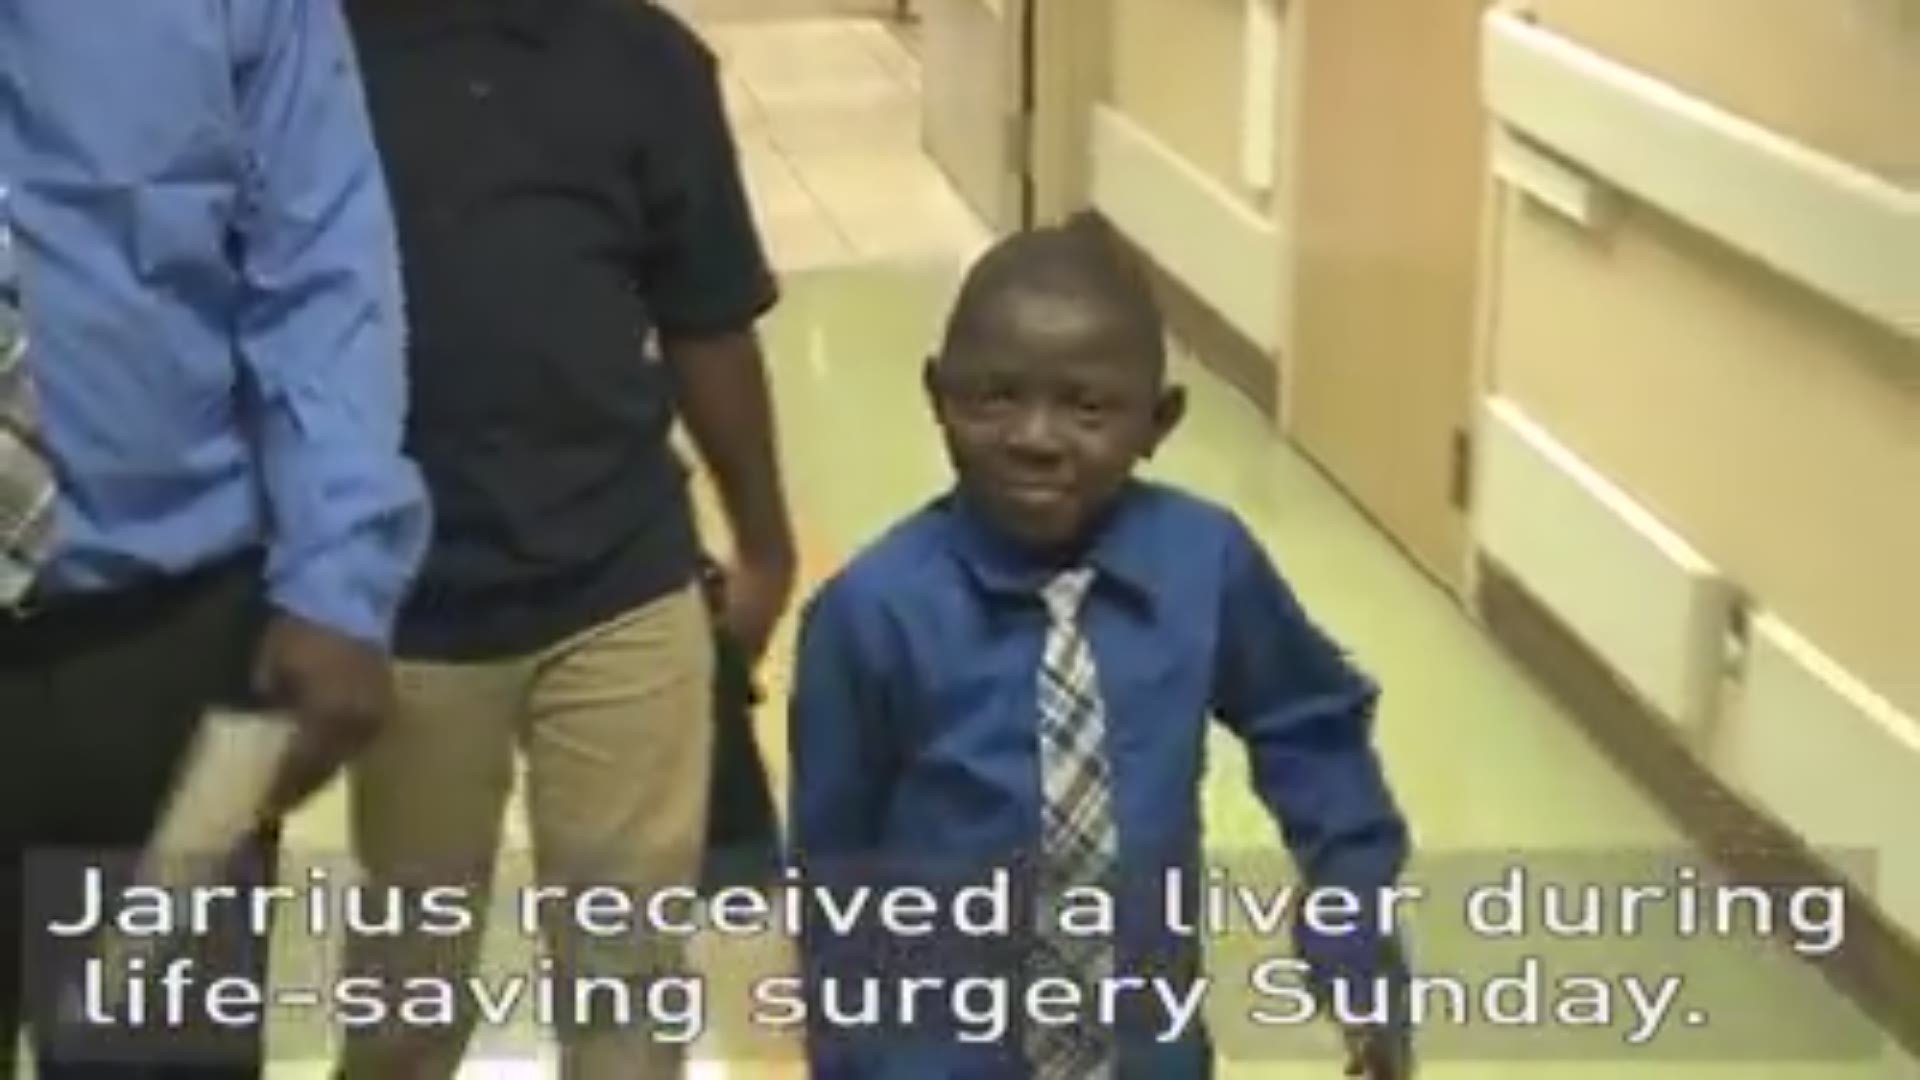 Jarrius Robertson has received the much-needed liver transplant and his father says he is doing well, though he is still asking for prayers. 